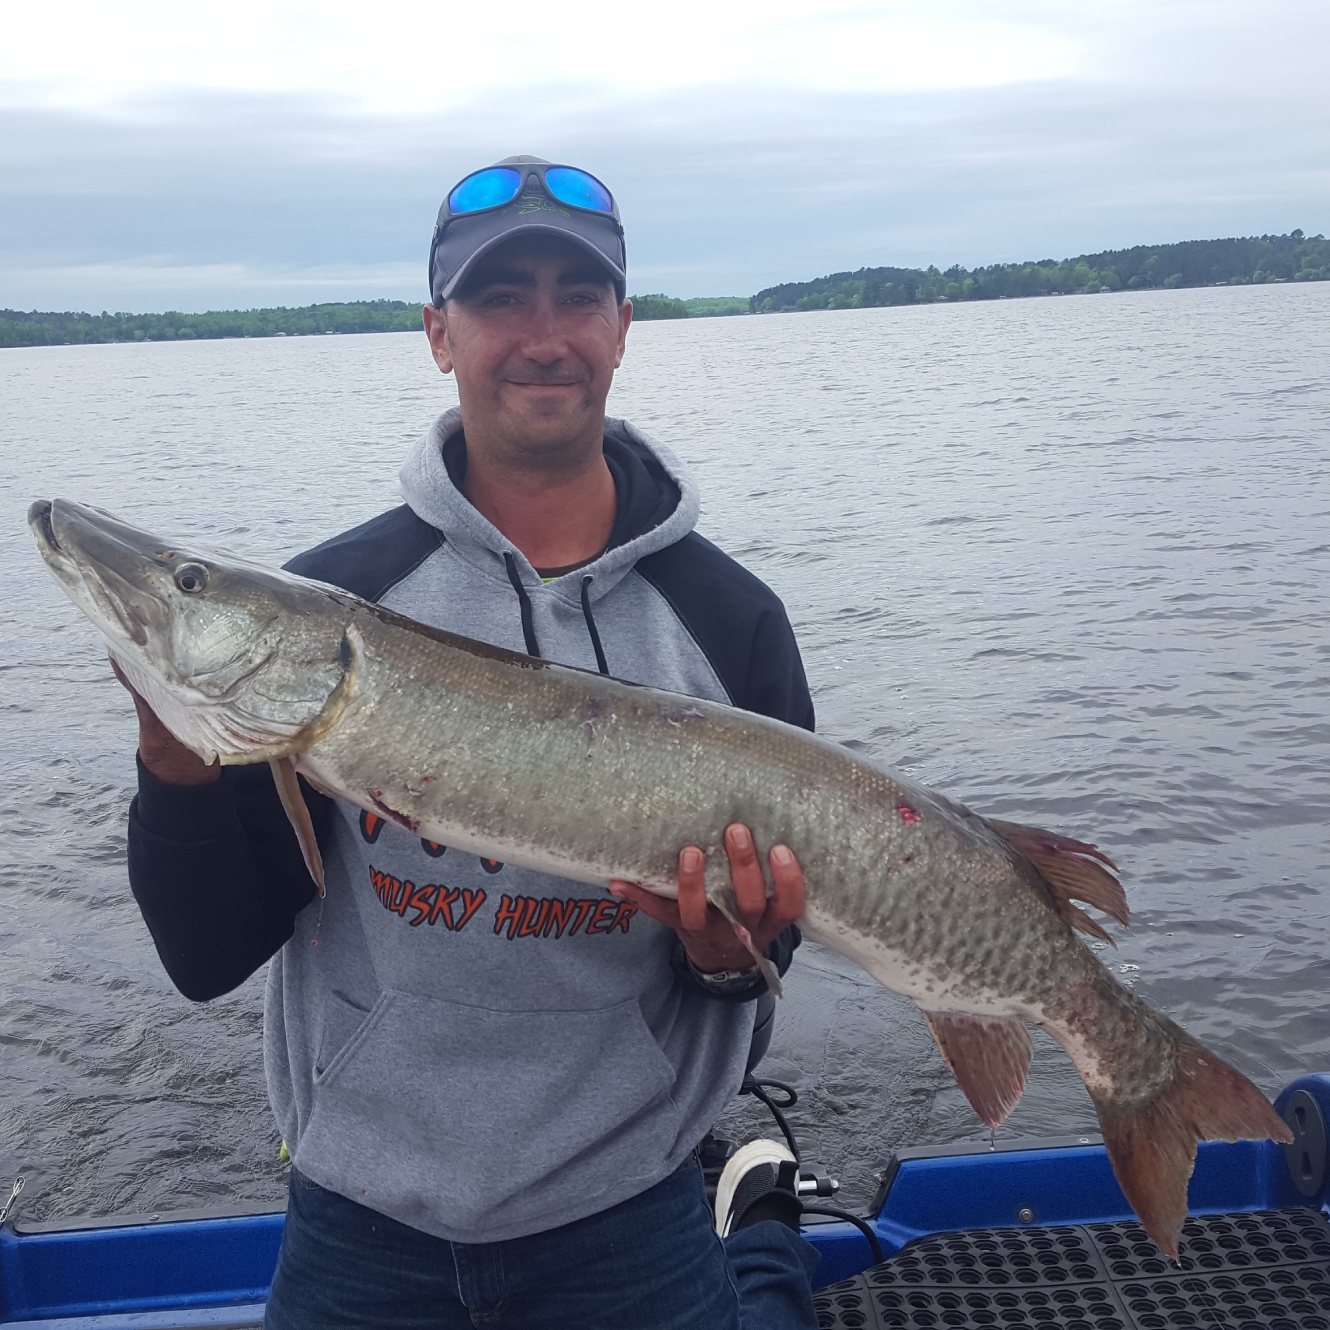 Gentleman holds a large muskie he caught on the Lake Vermilion during a cloudy day